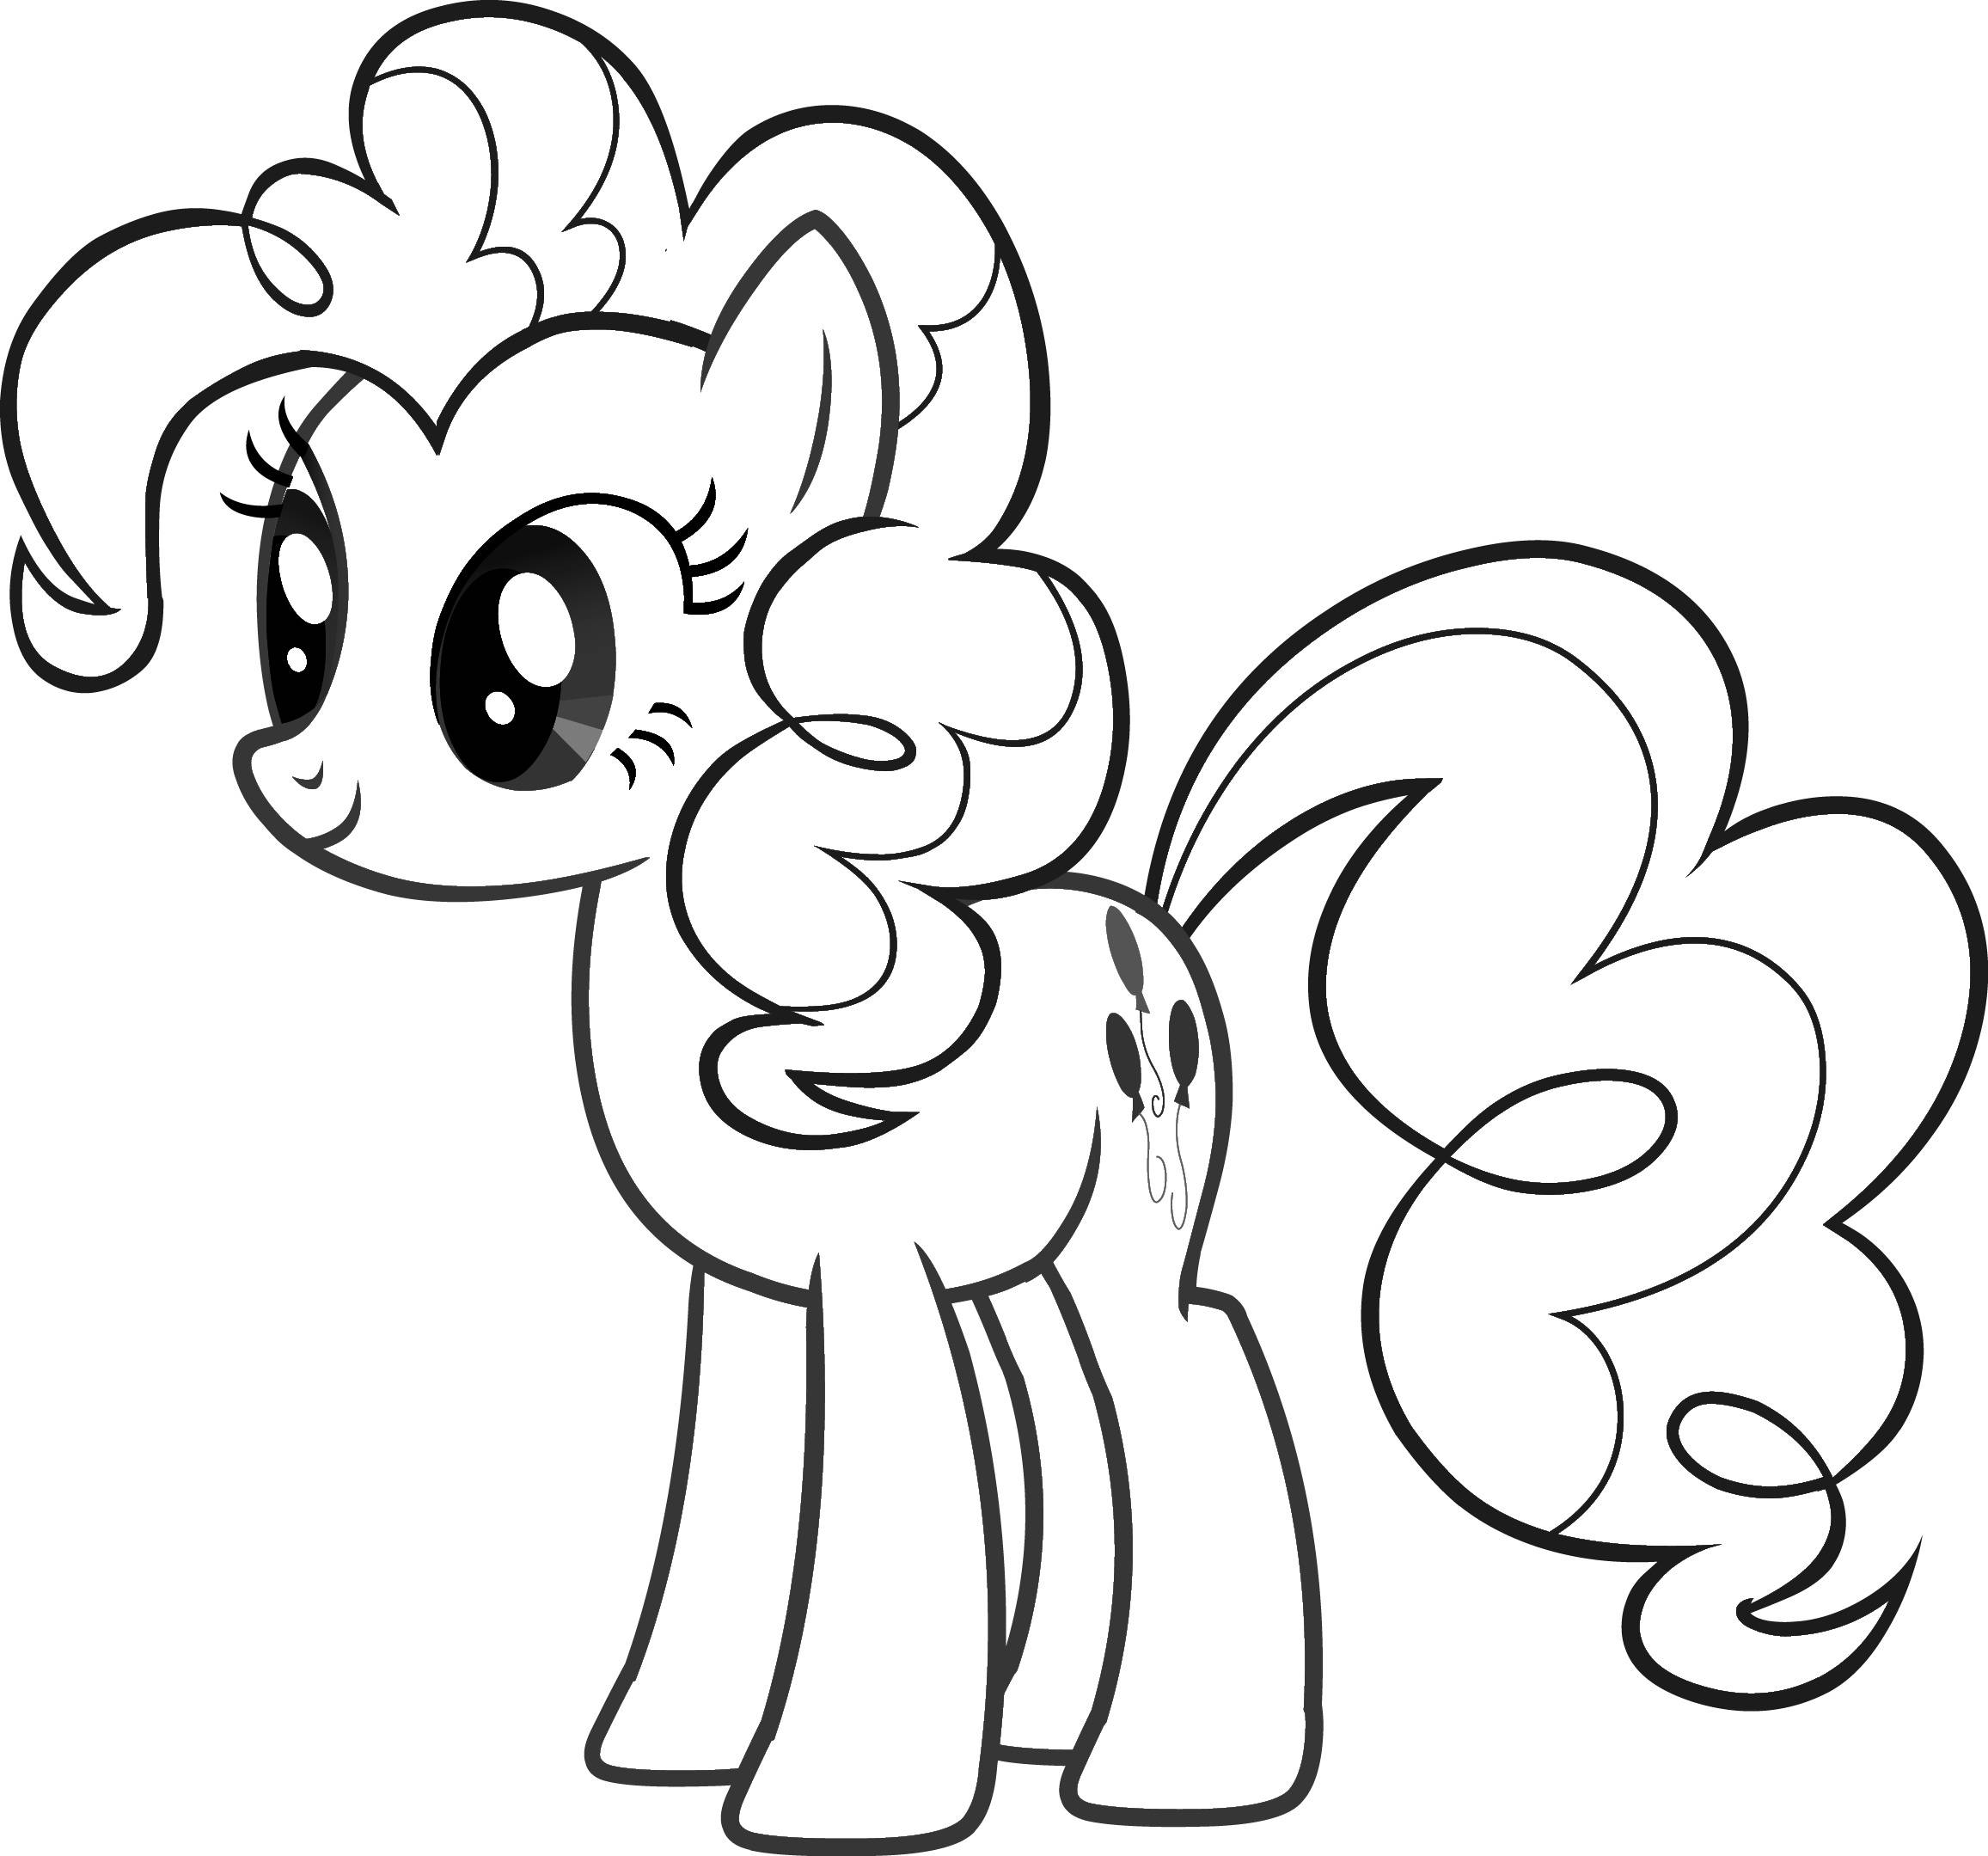 Mlp Coloring Pages To Print - High Quality Coloring Pages